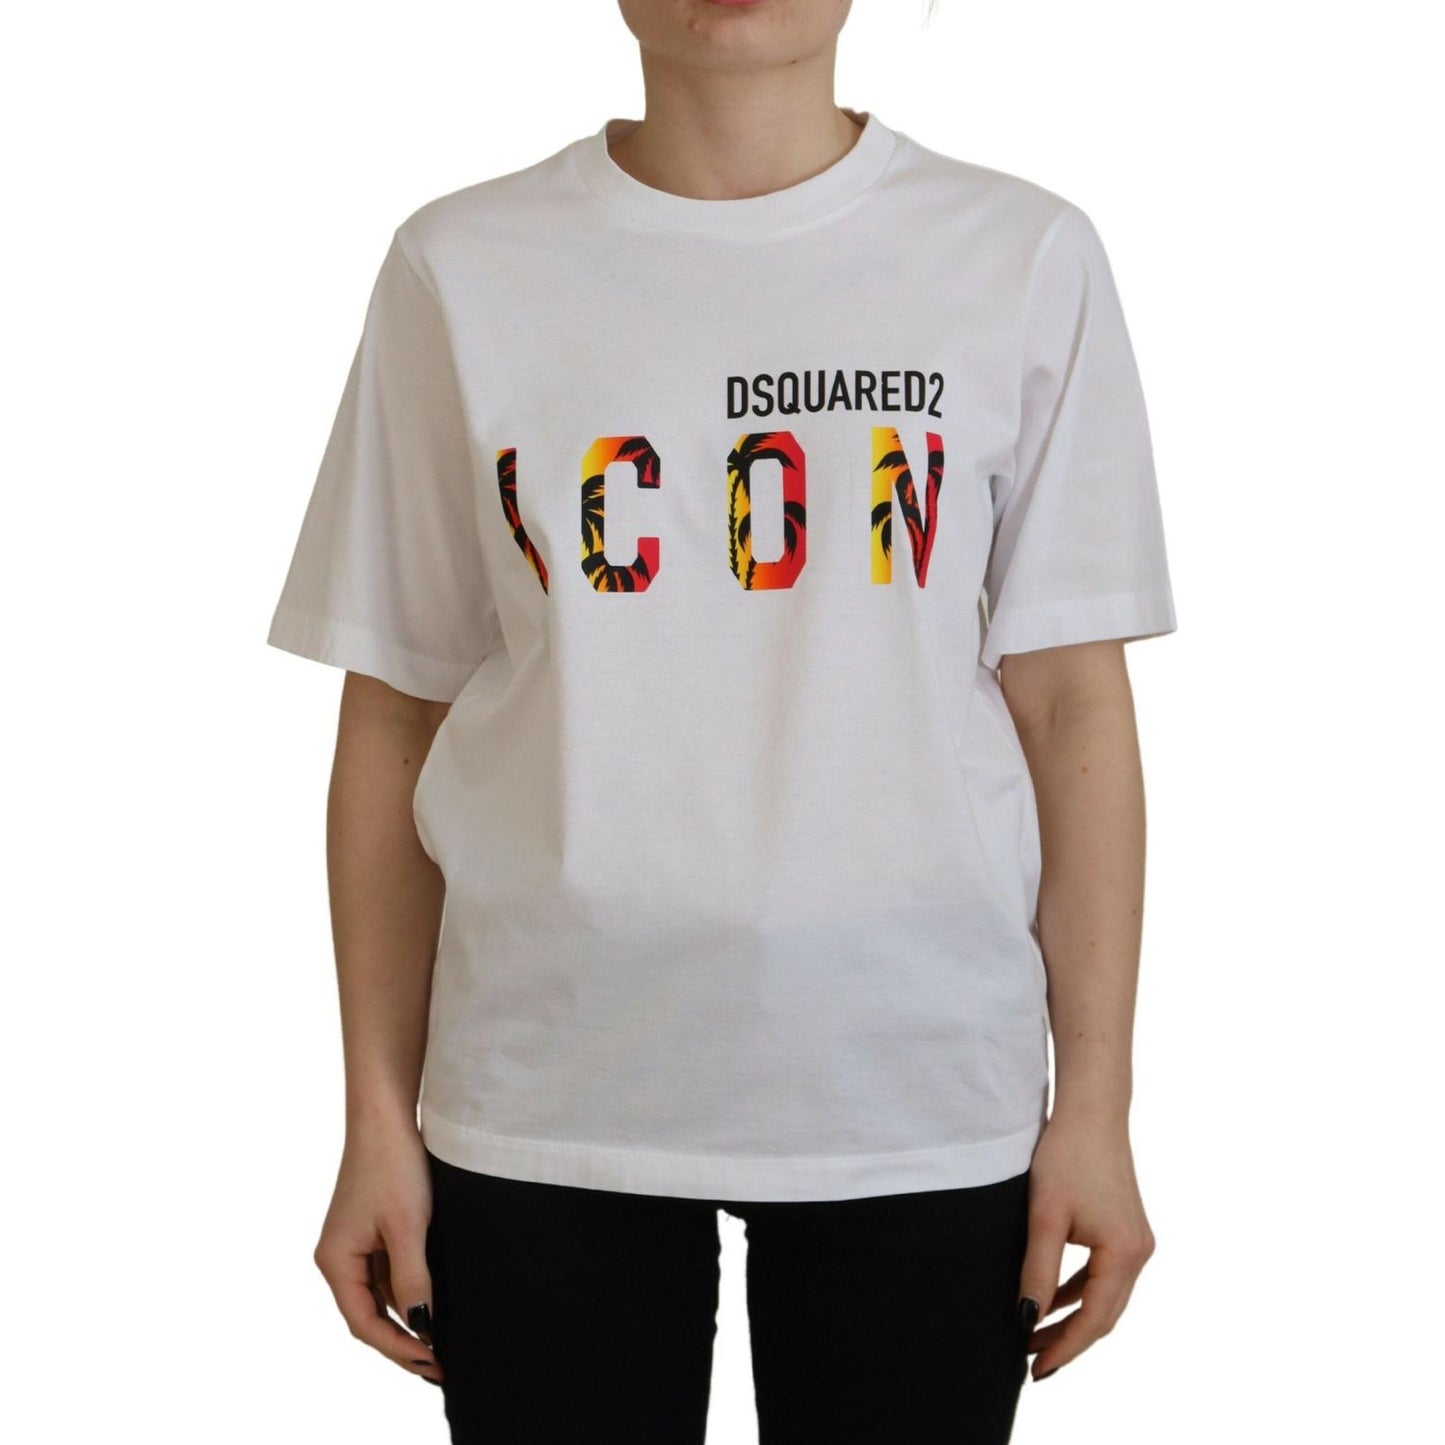 Dsquared² White Cotton Shiny Icon East Tee Crewneck T-shirt white-cotton-shiny-icon-east-tee-crewneck-t-shirt